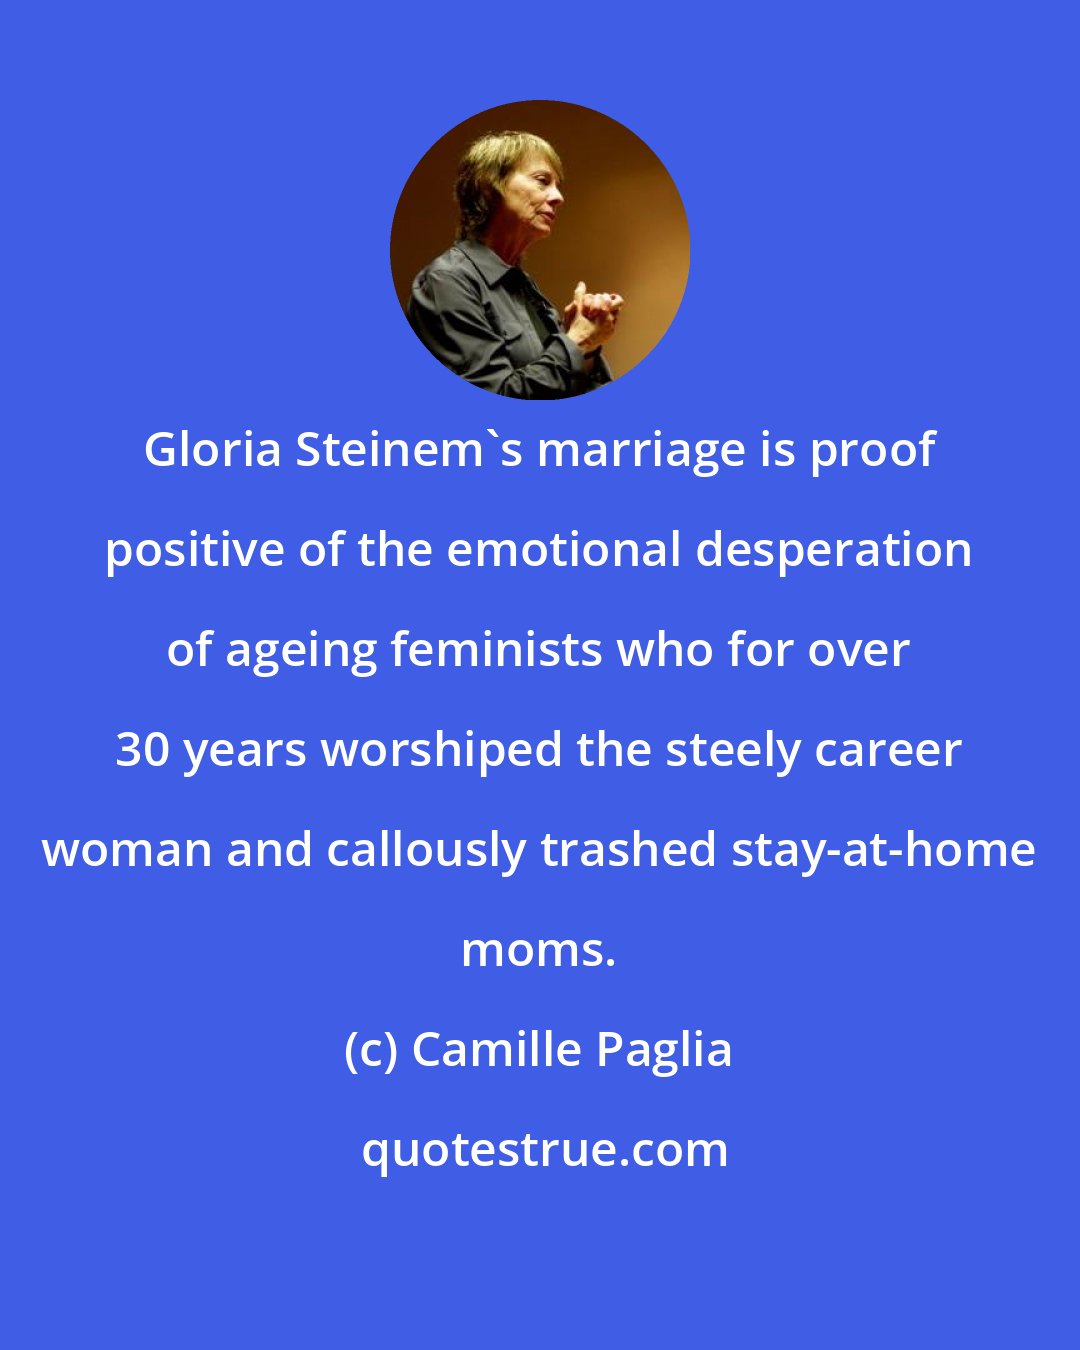 Camille Paglia: Gloria Steinem's marriage is proof positive of the emotional desperation of ageing feminists who for over 30 years worshiped the steely career woman and callously trashed stay-at-home moms.